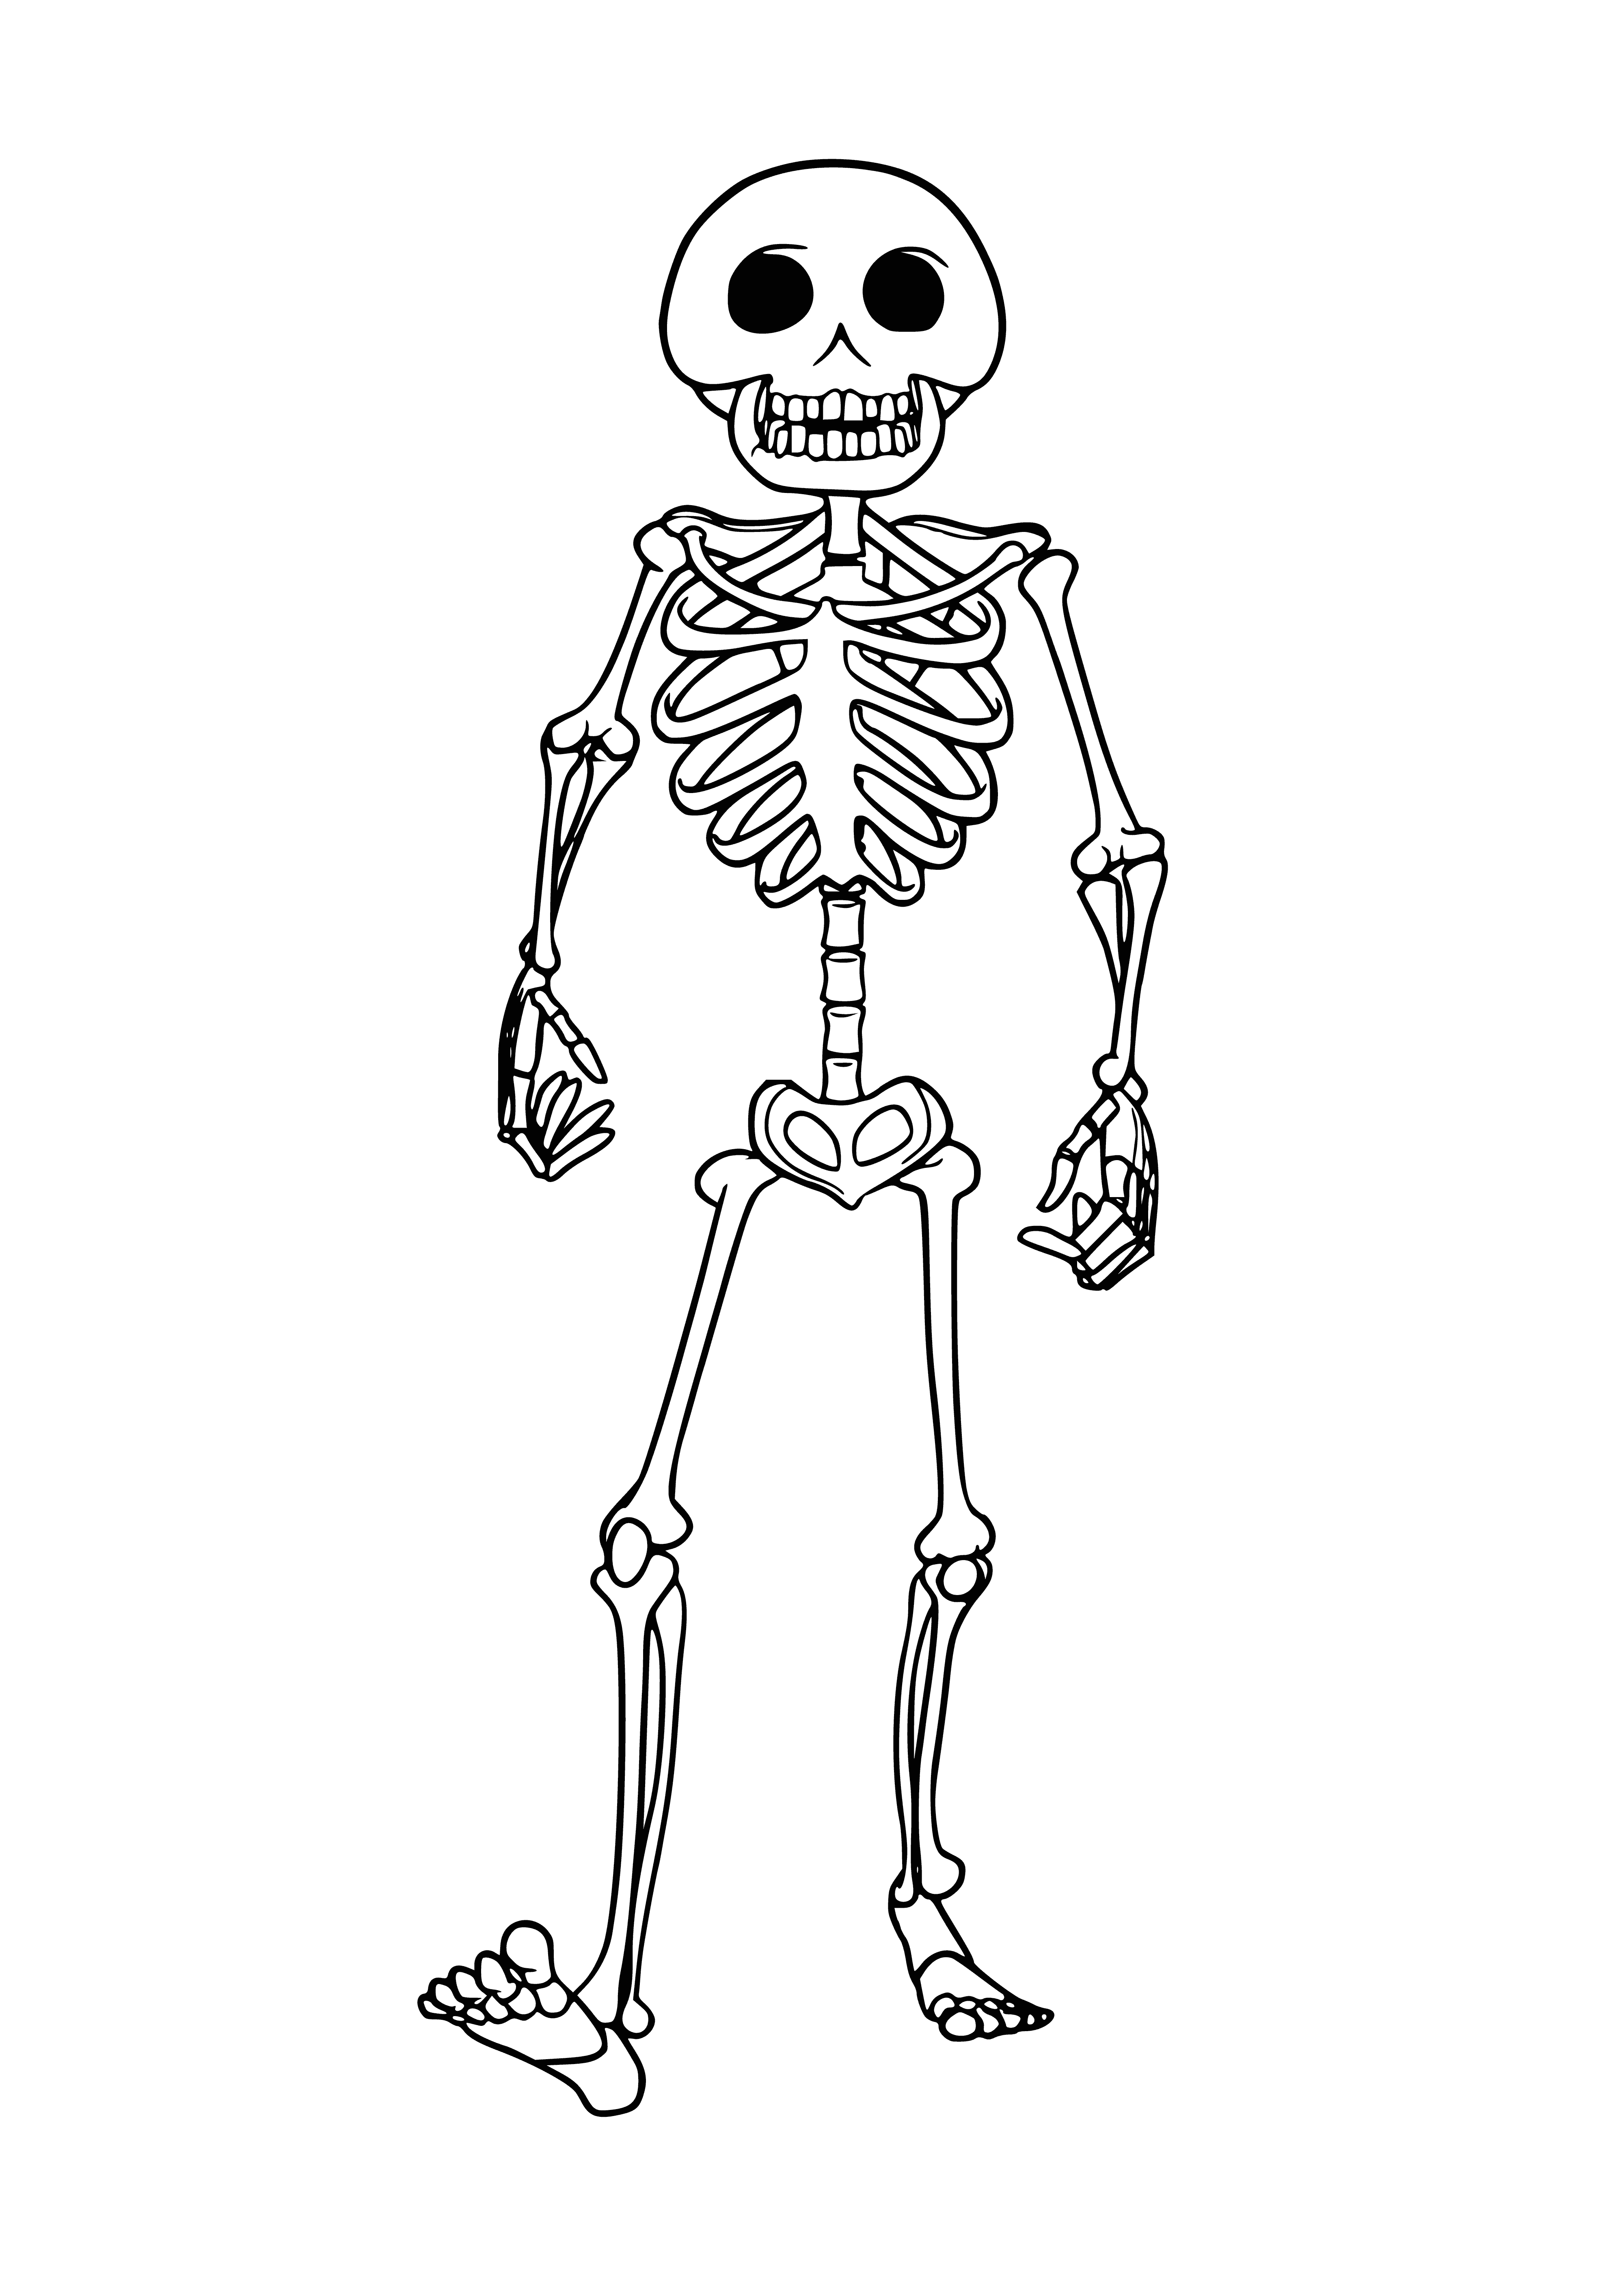 coloring page: Skeleton wearing black suit and hat, white shirt, black tie sitting on bench in a coffin.